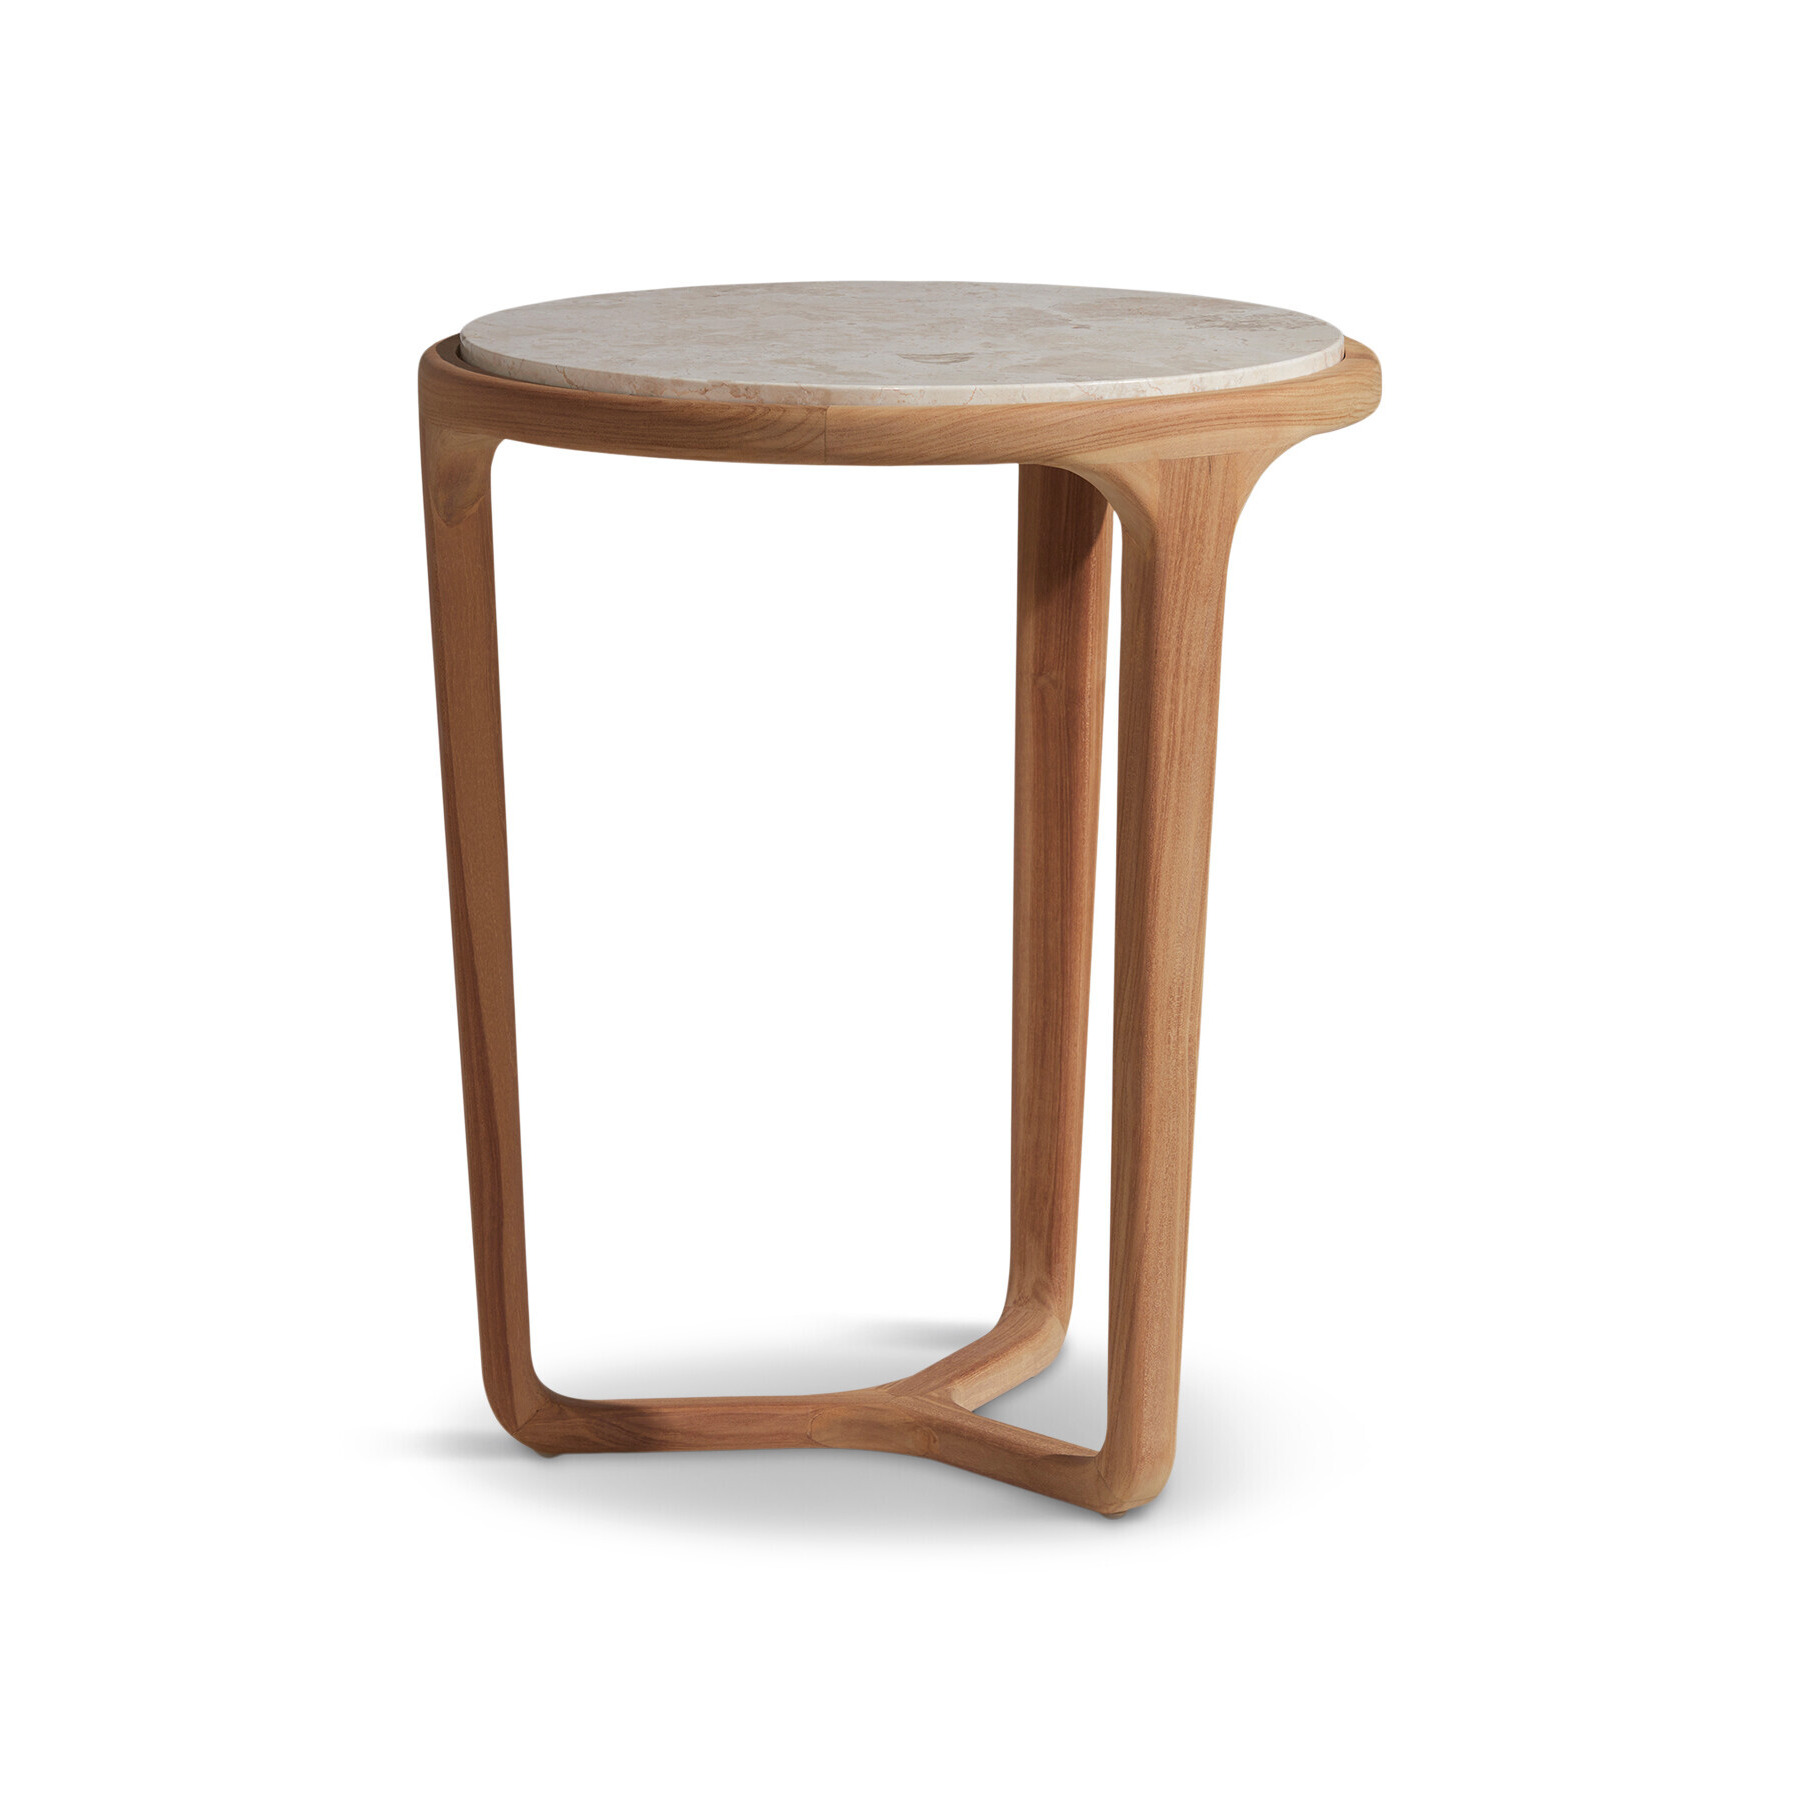 Barker and Stonehouse Terza Round Brown Teak and Marble Side Table - image 1